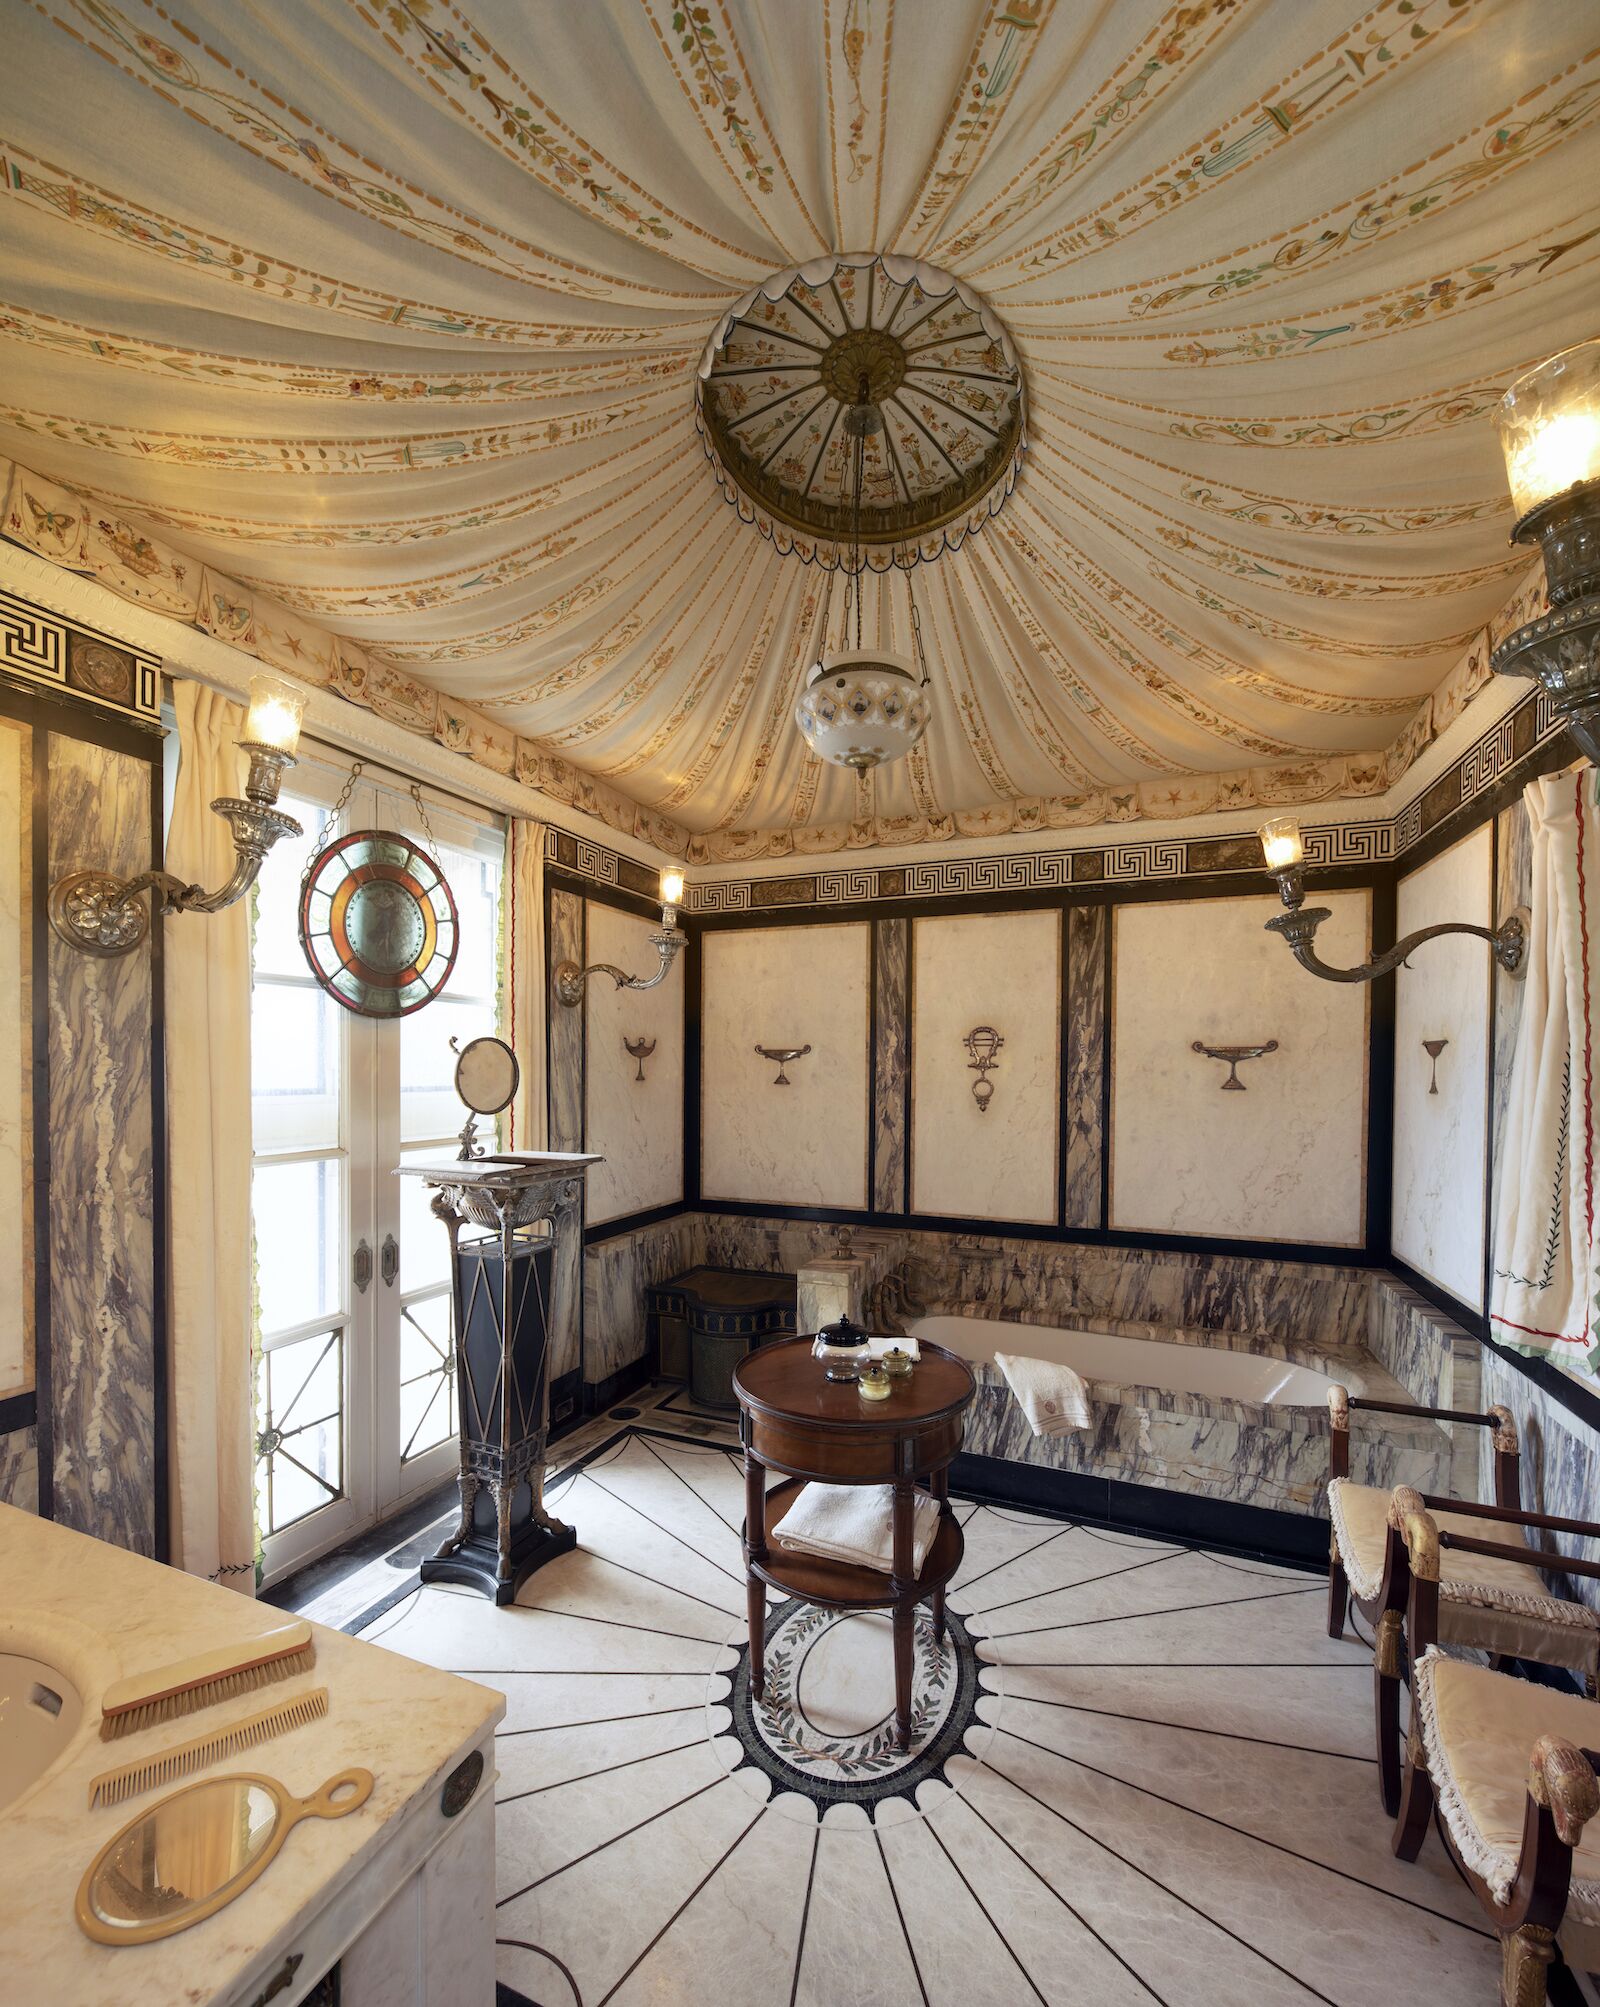 John Deering's bathroom, made of marble, at the Vizcaya Museum and Gardens in Miami